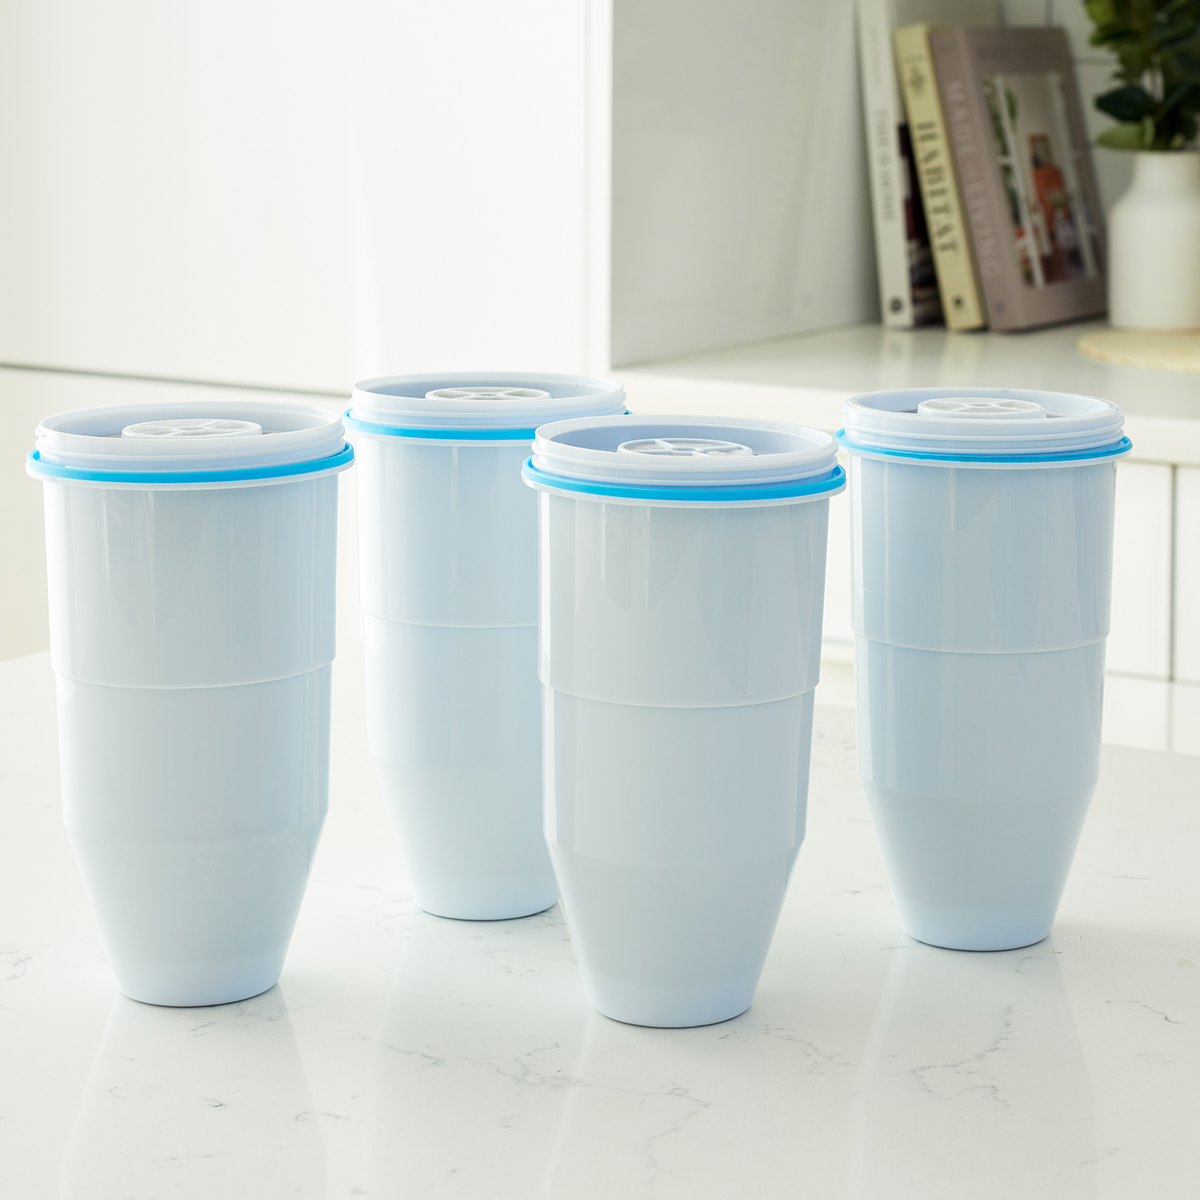 ZeroWater Premium 5-Stage Replacement Water Filter | The Container Store